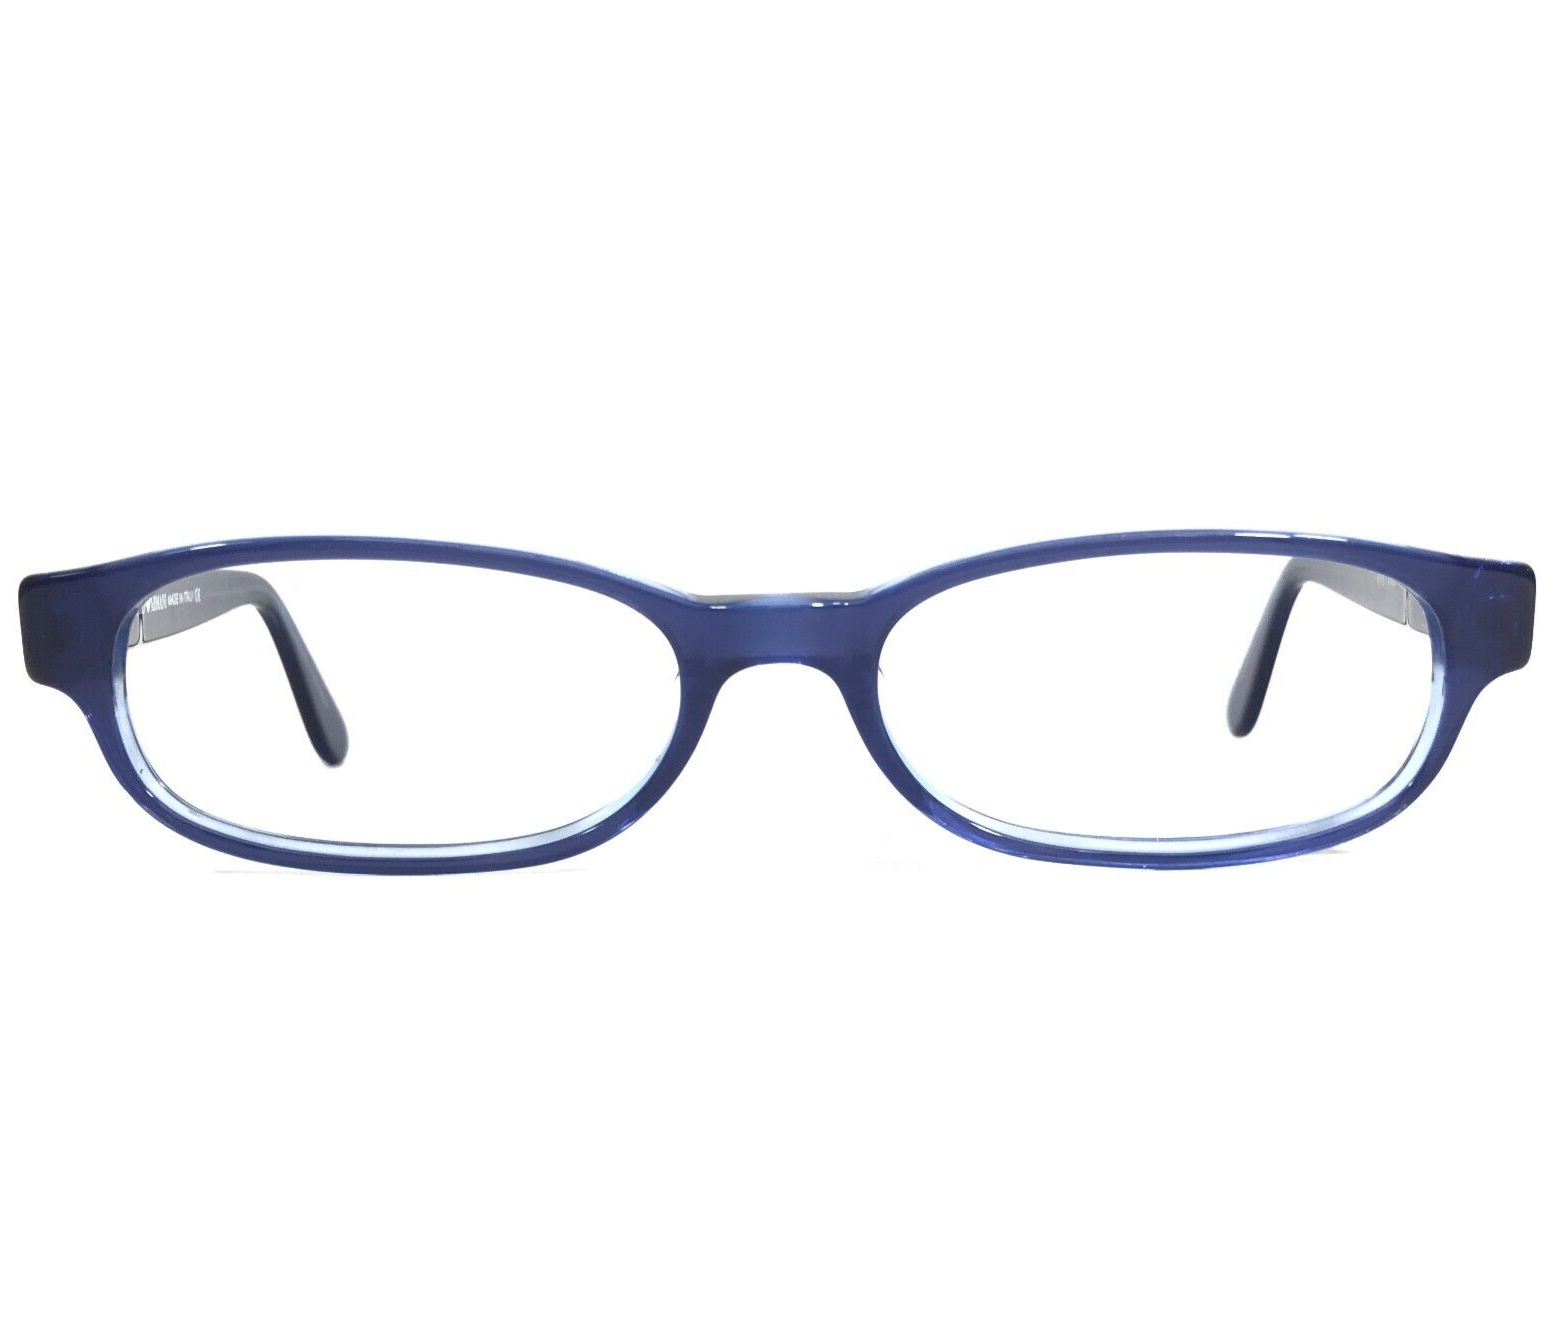 Primary image for Emporio Armani Eyeglasses Frames 610 414 Clear Blue Rectangular Oval 54-17-140